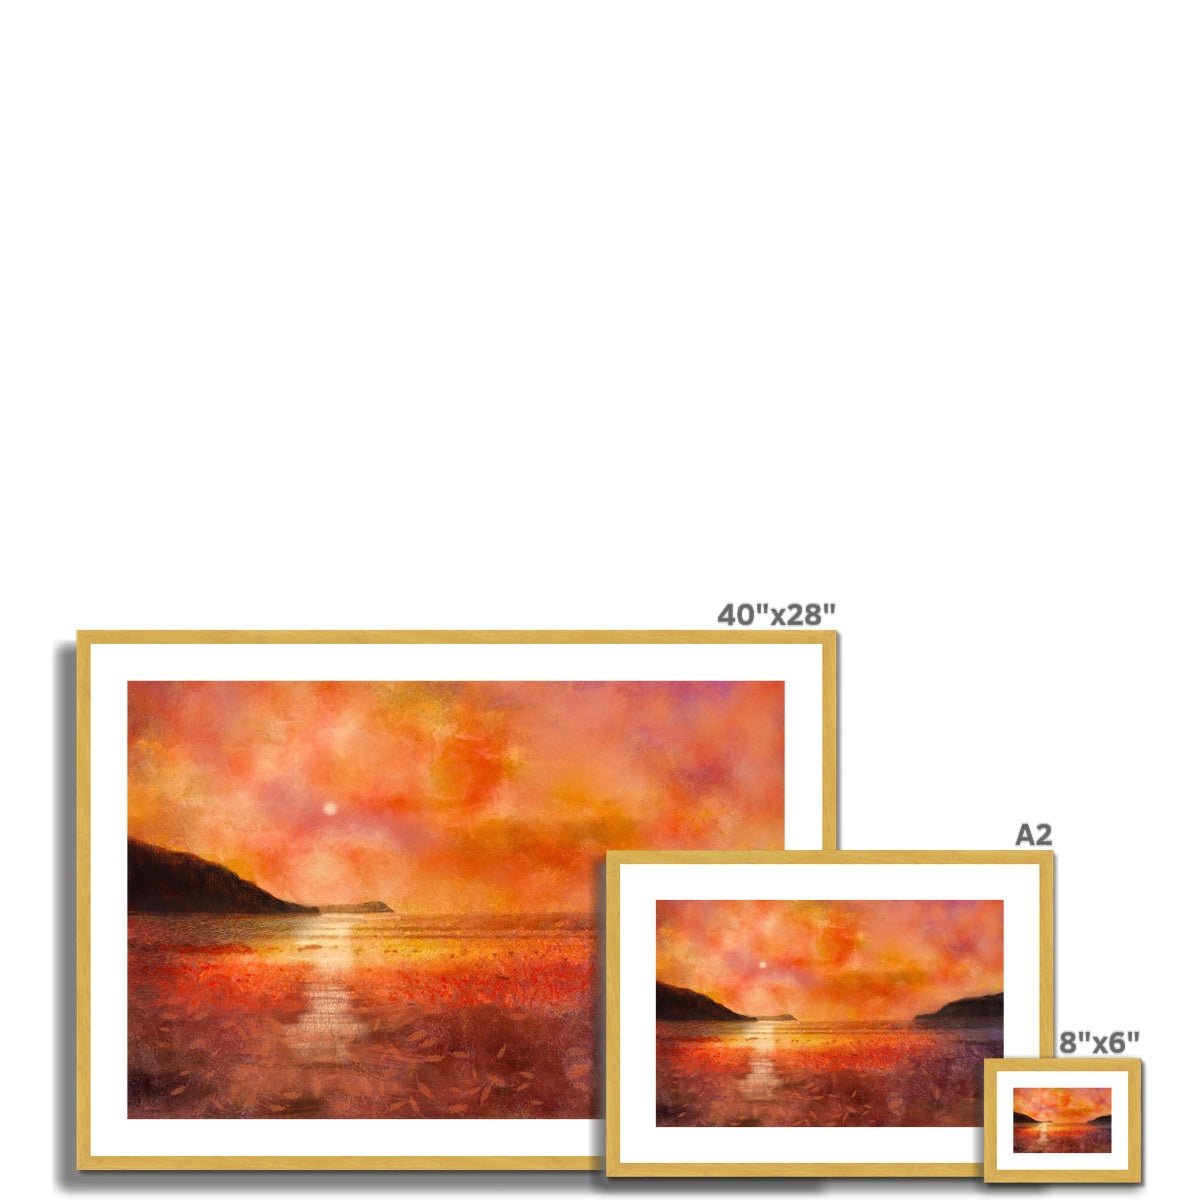 Calgary Beach Sunset Mull Painting | Antique Framed & Mounted Prints From Scotland-Antique Framed & Mounted Prints-Hebridean Islands Art Gallery-Paintings, Prints, Homeware, Art Gifts From Scotland By Scottish Artist Kevin Hunter